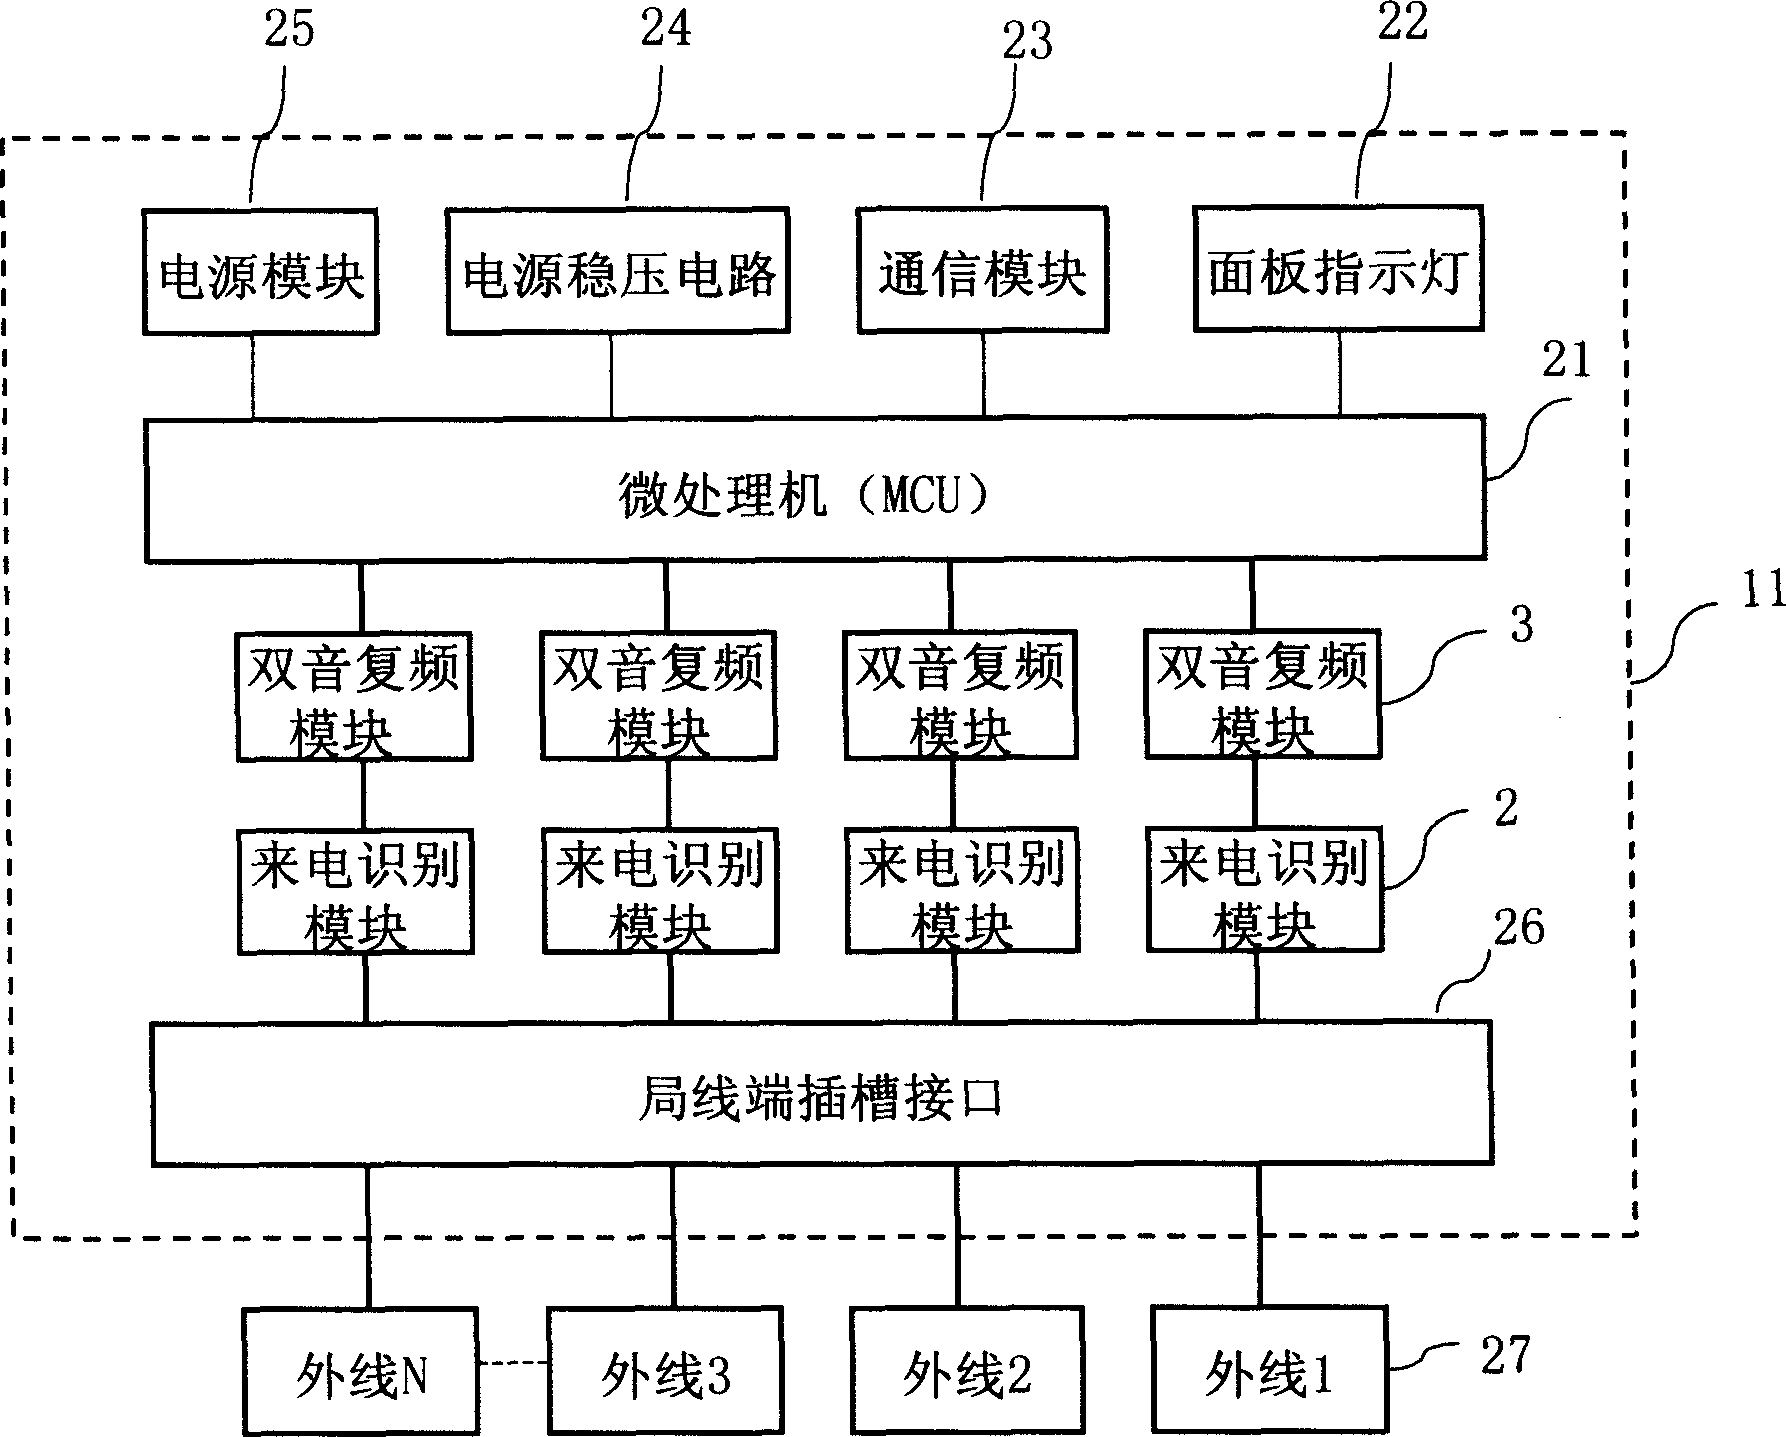 Automatic display method and system for incoming message switched by extension telephone